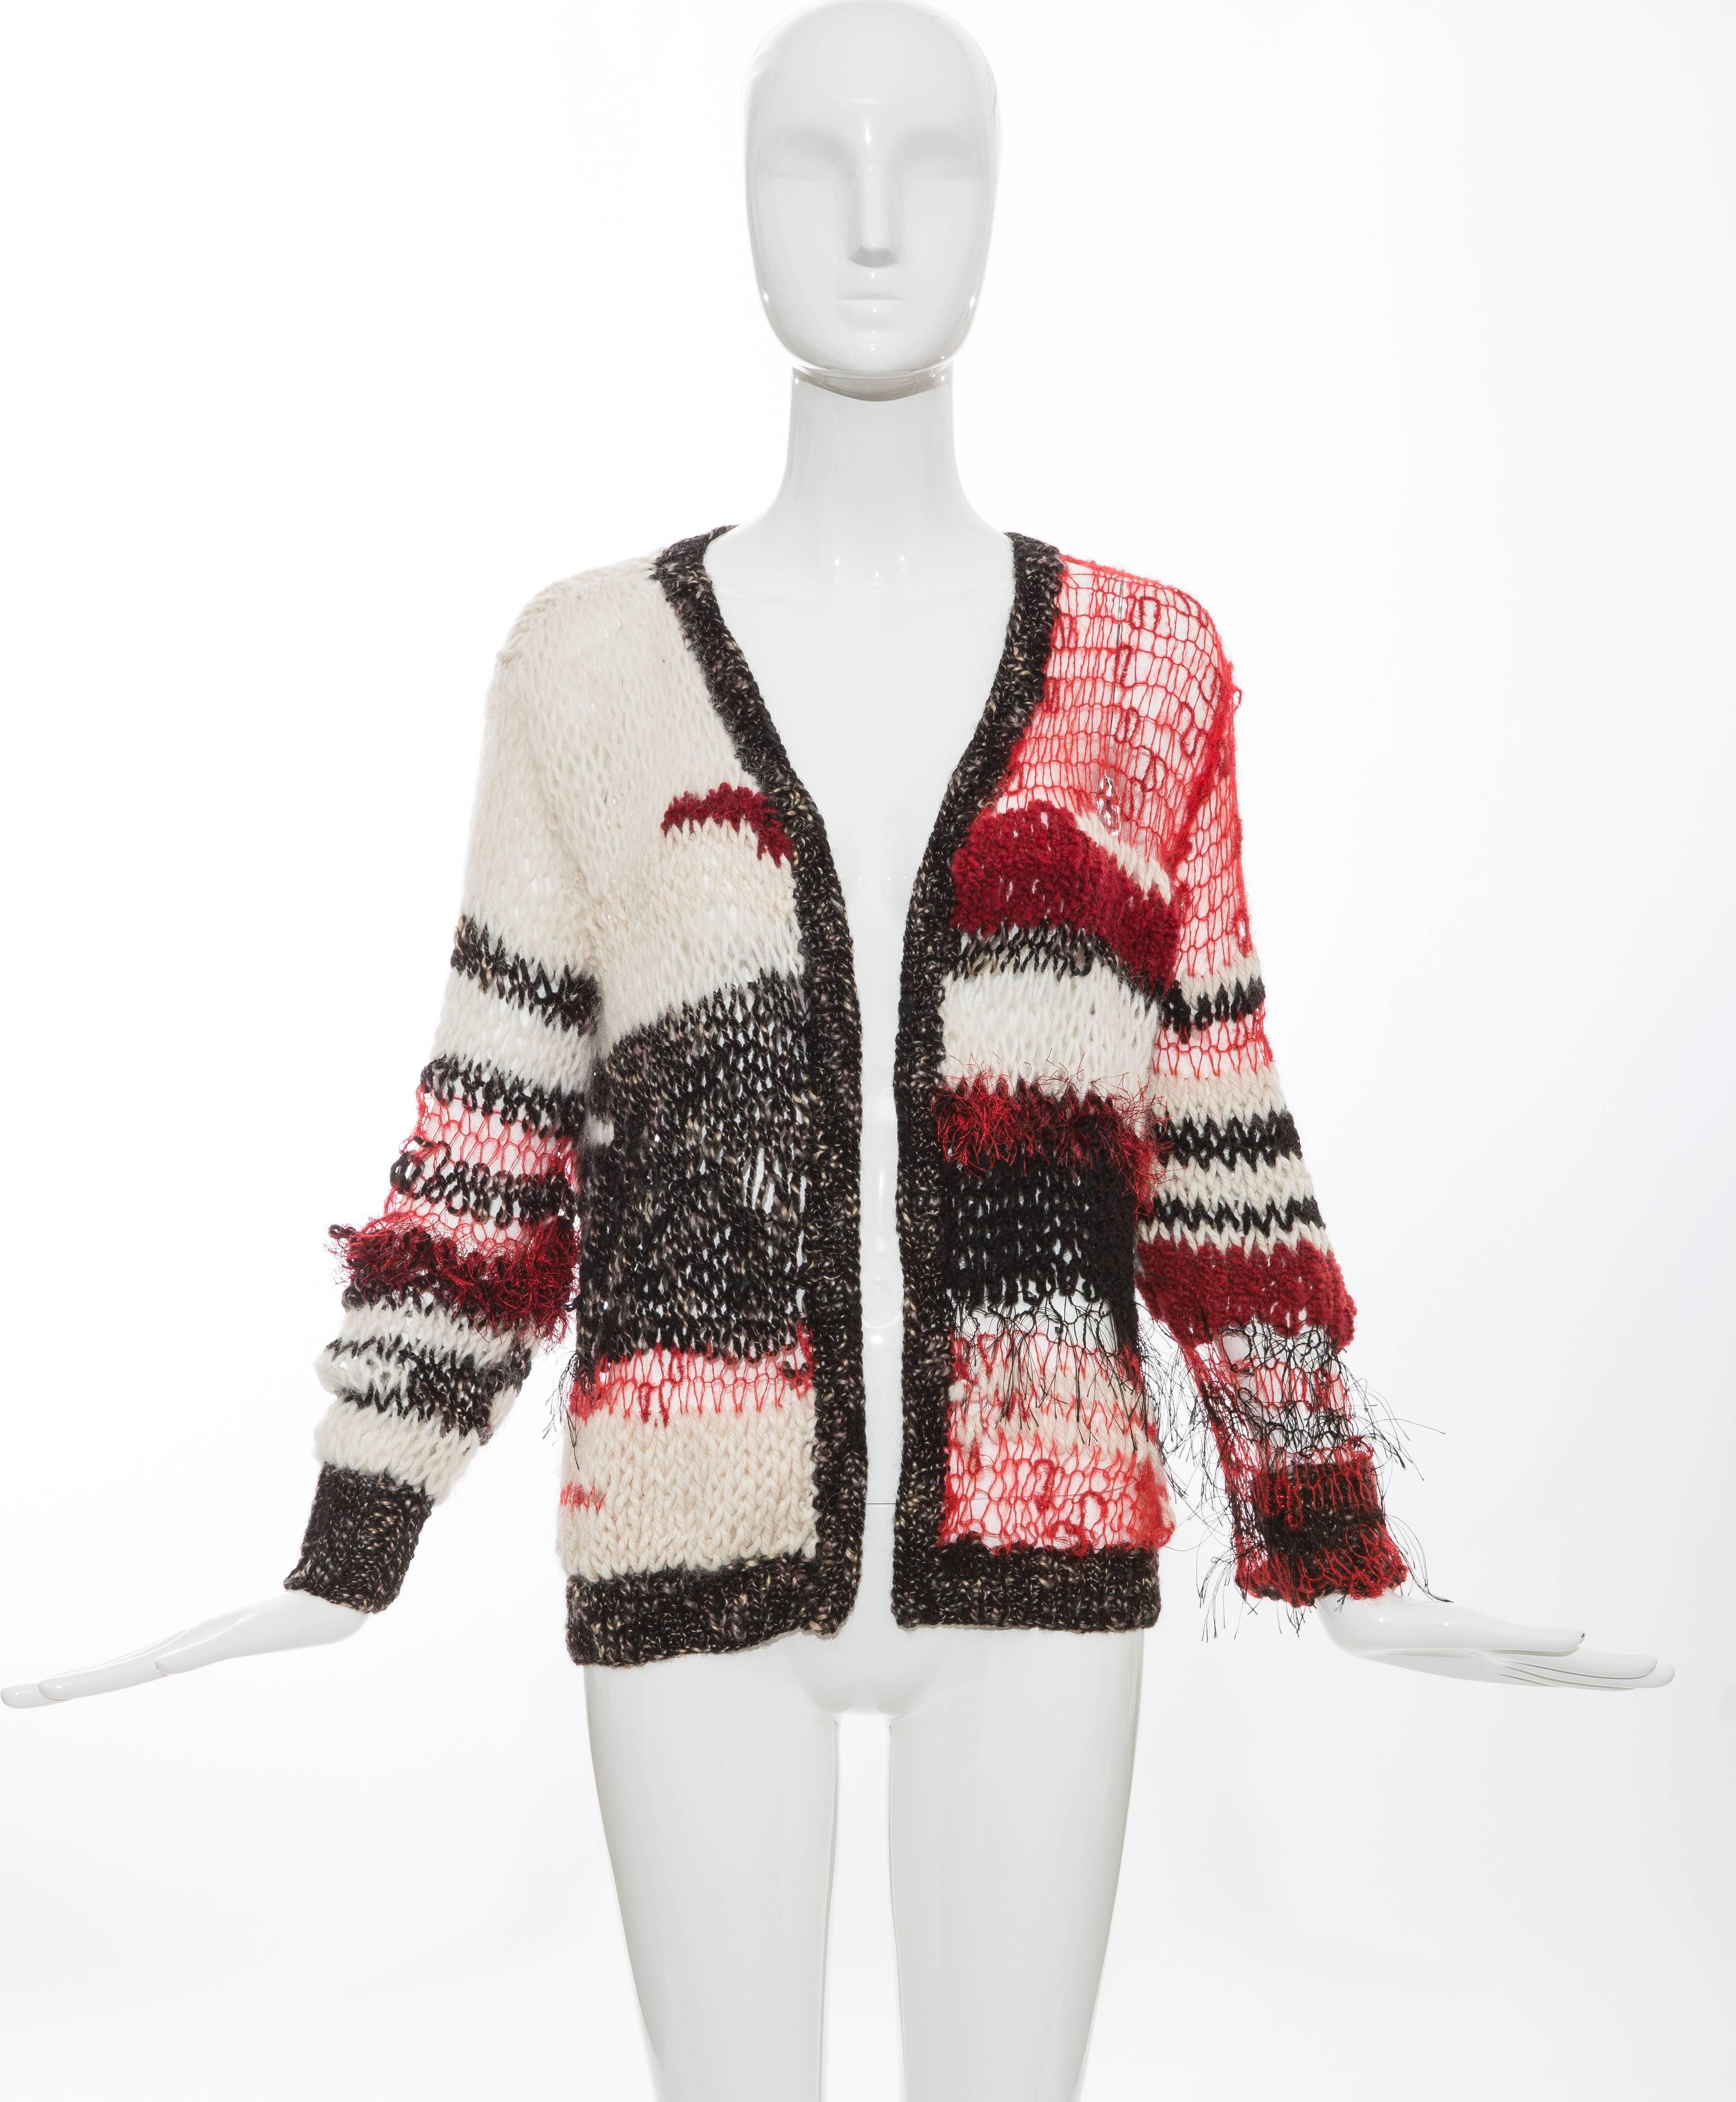 Rodarte, Autumn-Winter 2008, open knit mohair cardigan with metallic stitching, fringe trim, long sleeves with ribbed trim and open front.

Retail: $2300

Medium
Bust 38”, Waist 37”, Length 25”